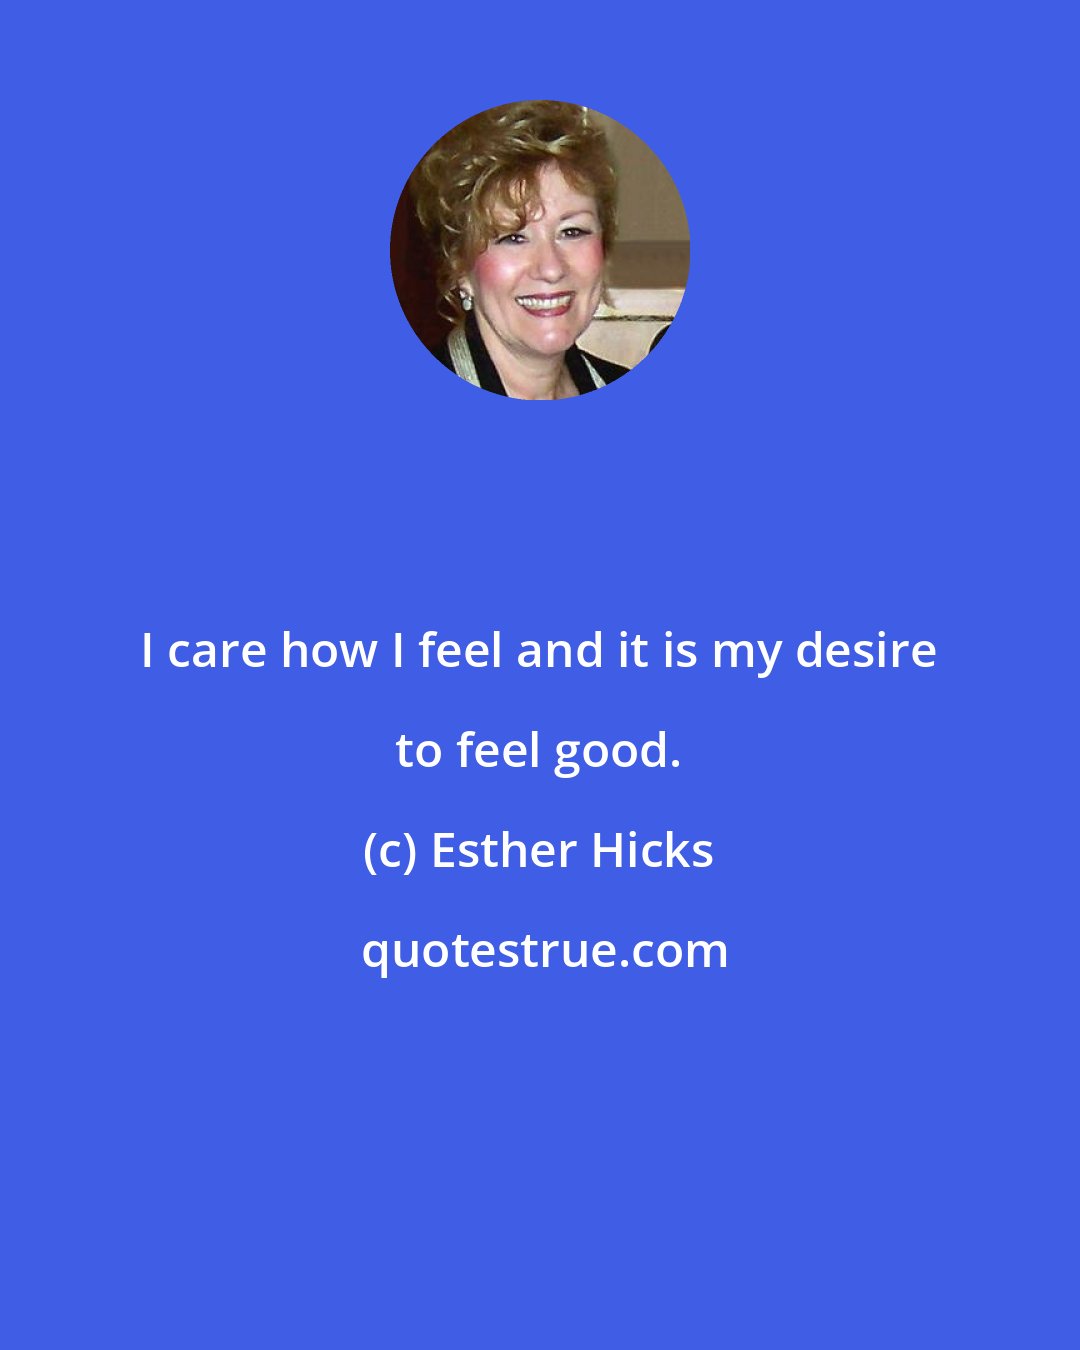 Esther Hicks: I care how I feel and it is my desire to feel good.